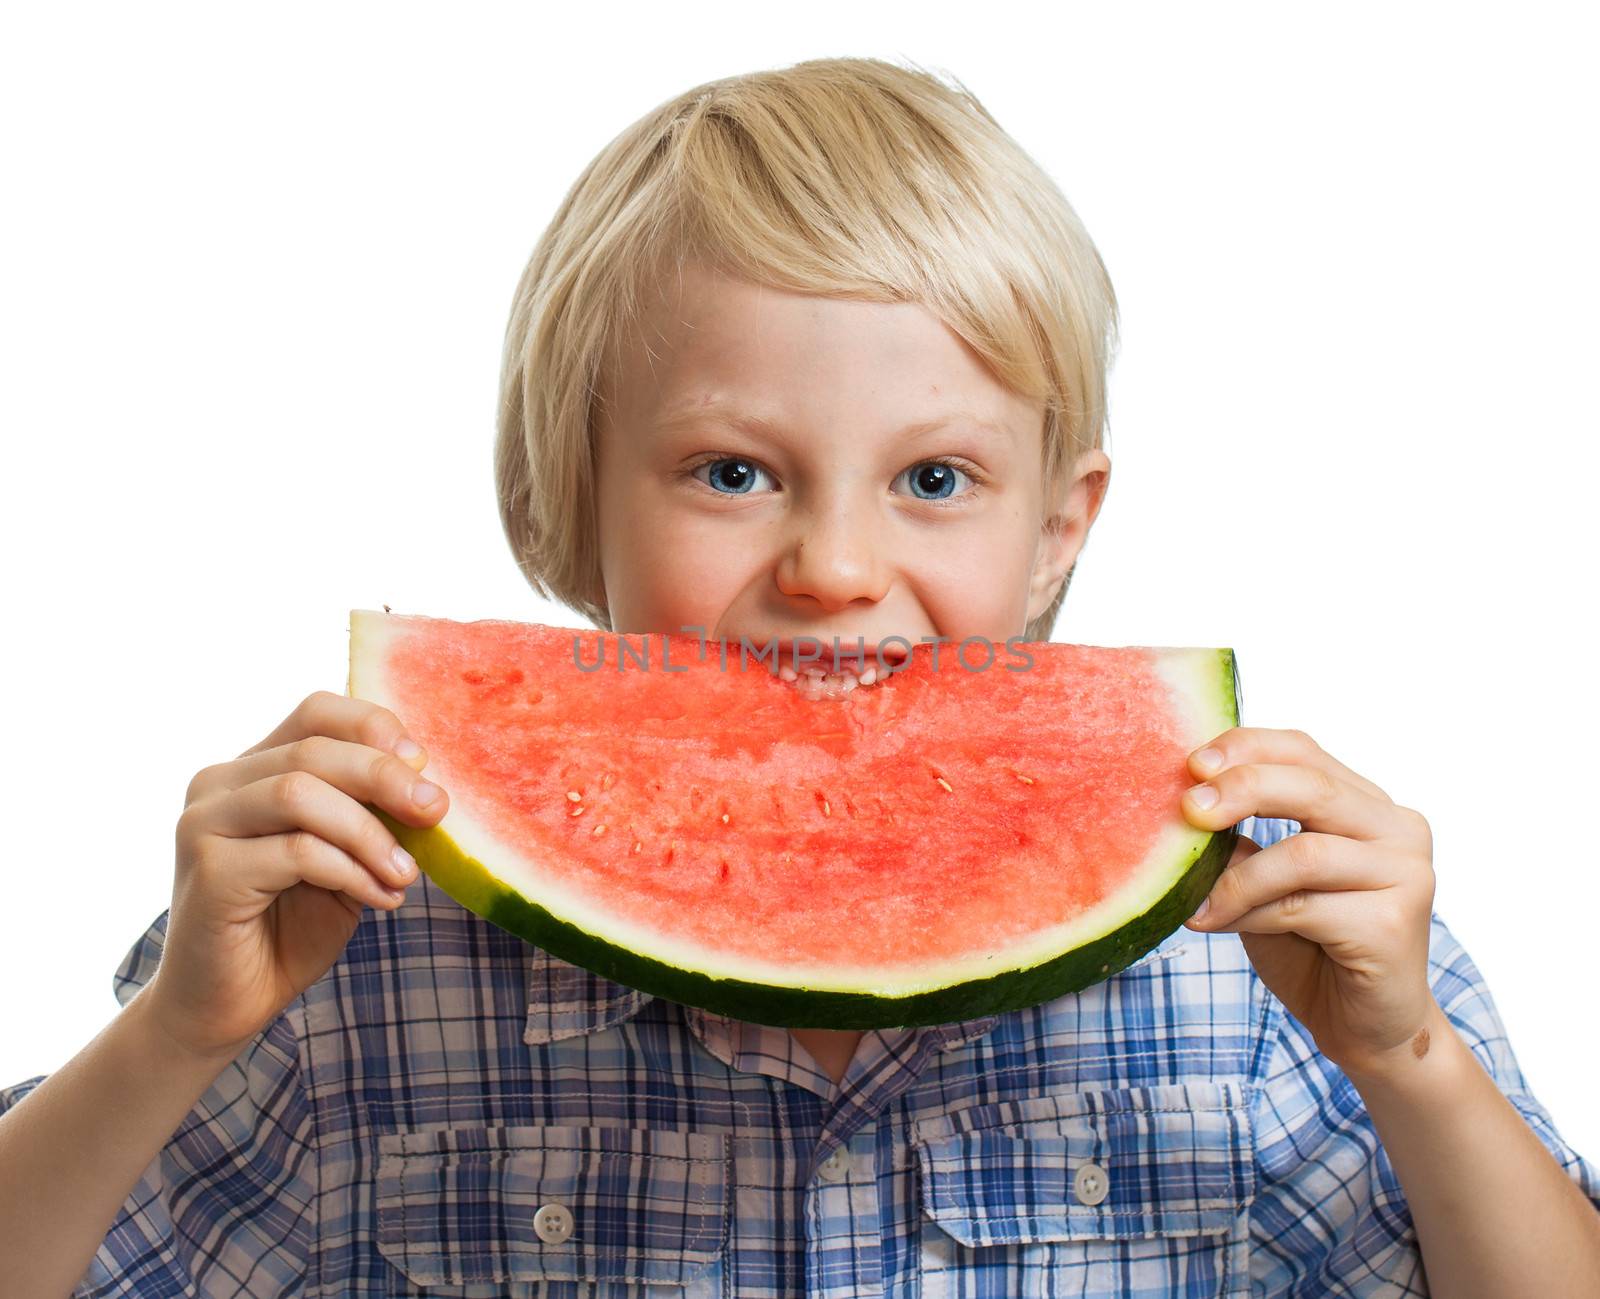 A cute happy smiling boy biting into a big juicy slice of watermelon. Isolated on white.